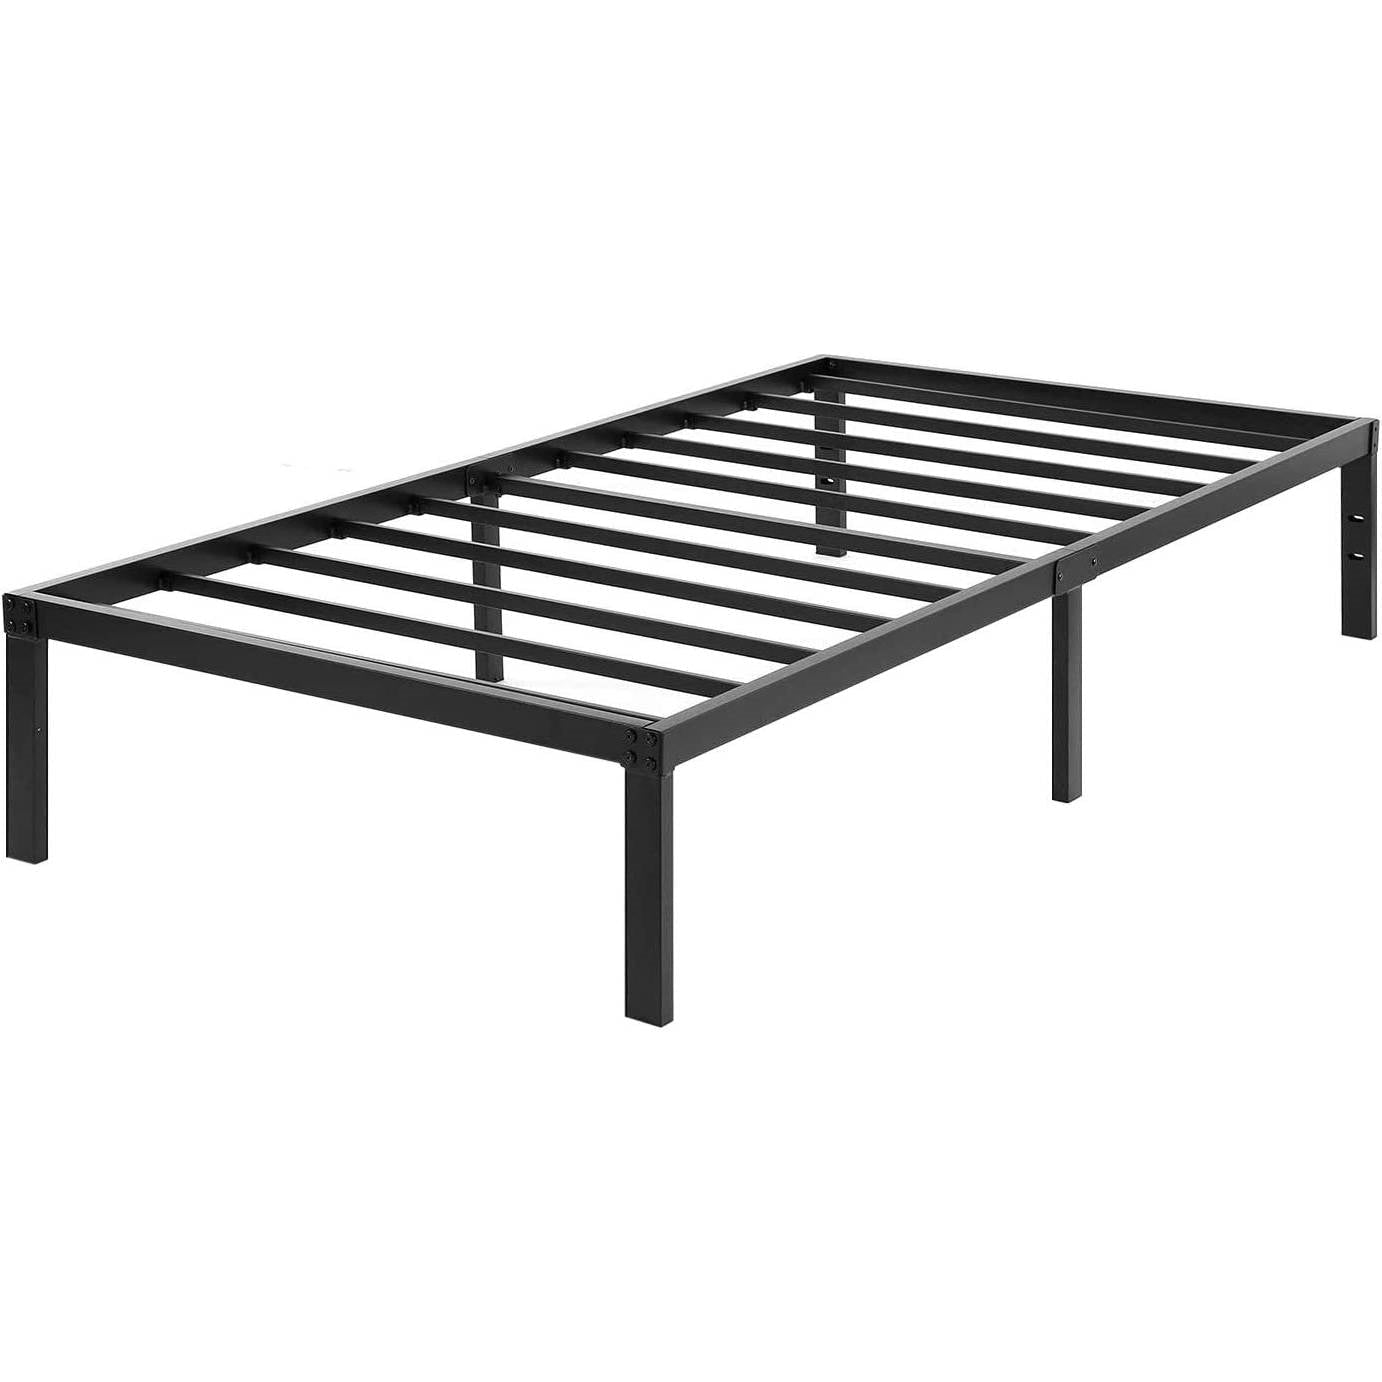 Bedroom > Bed Frames > Platform Beds - Twin XL 16-inch Heavy Duty Metal Bed Frame With 3,000 Lbs Weight Capacity